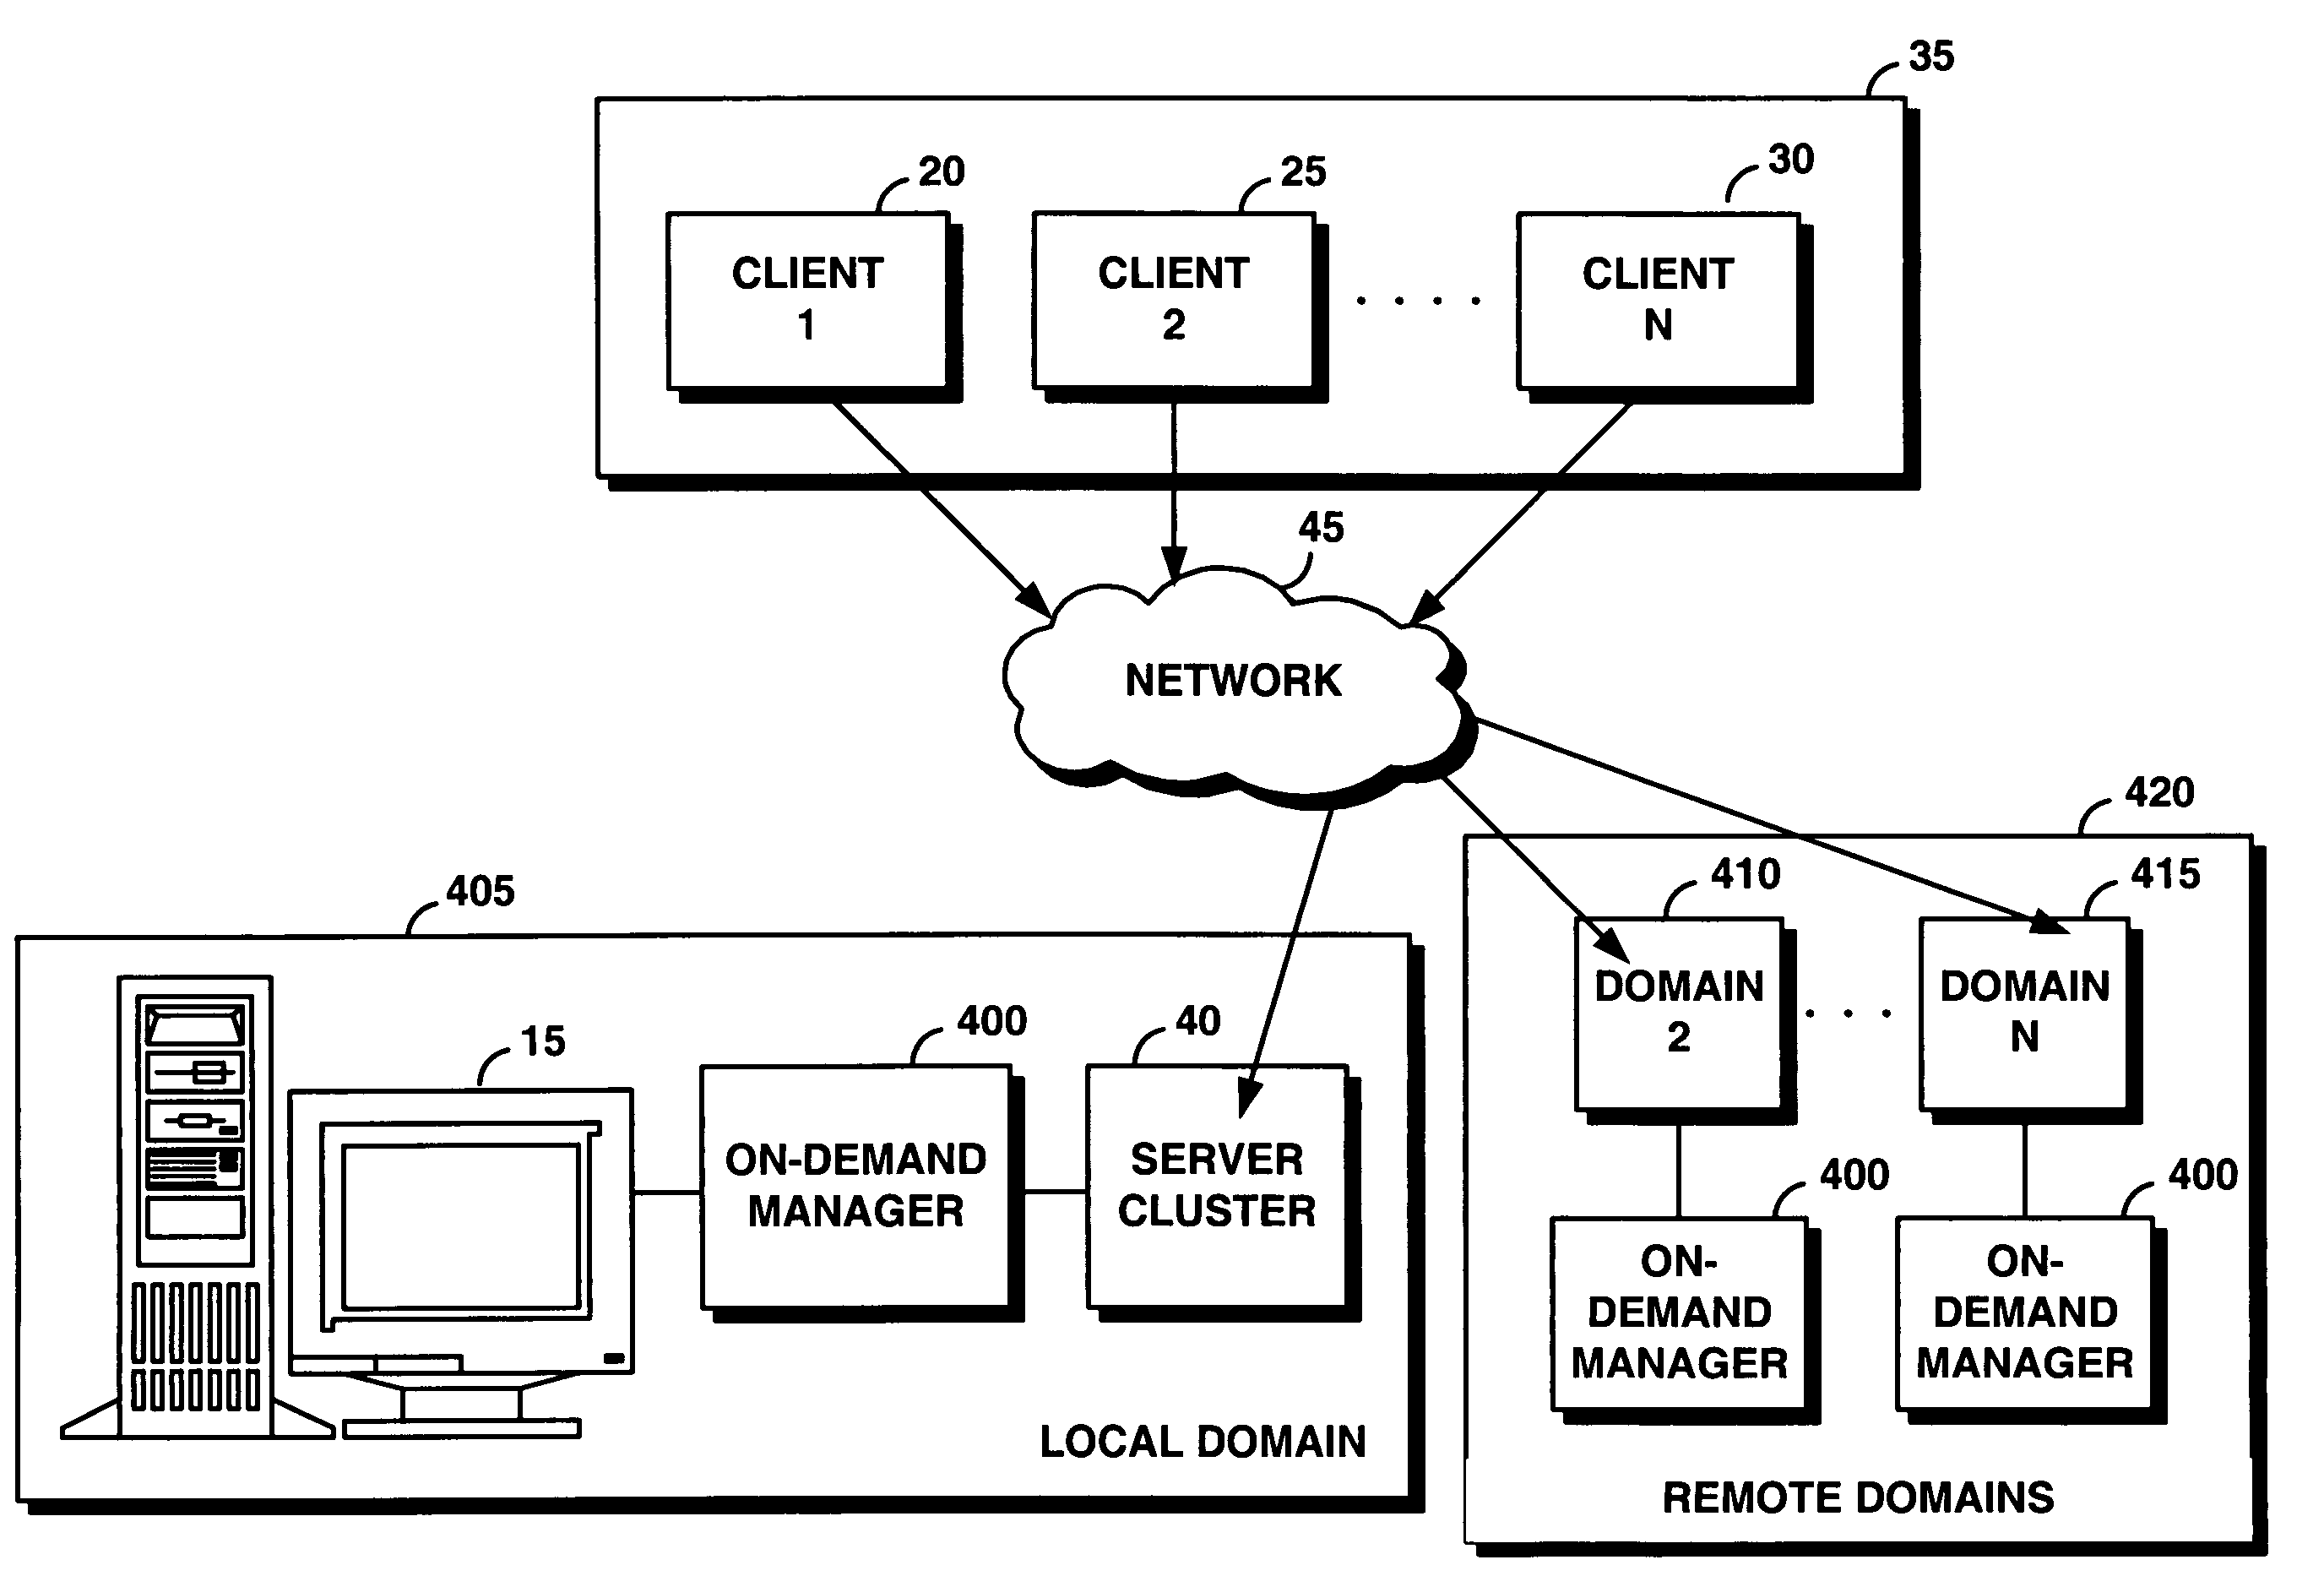 System and method for supporting transaction and parallel services across multiple domains based on service level agreenments